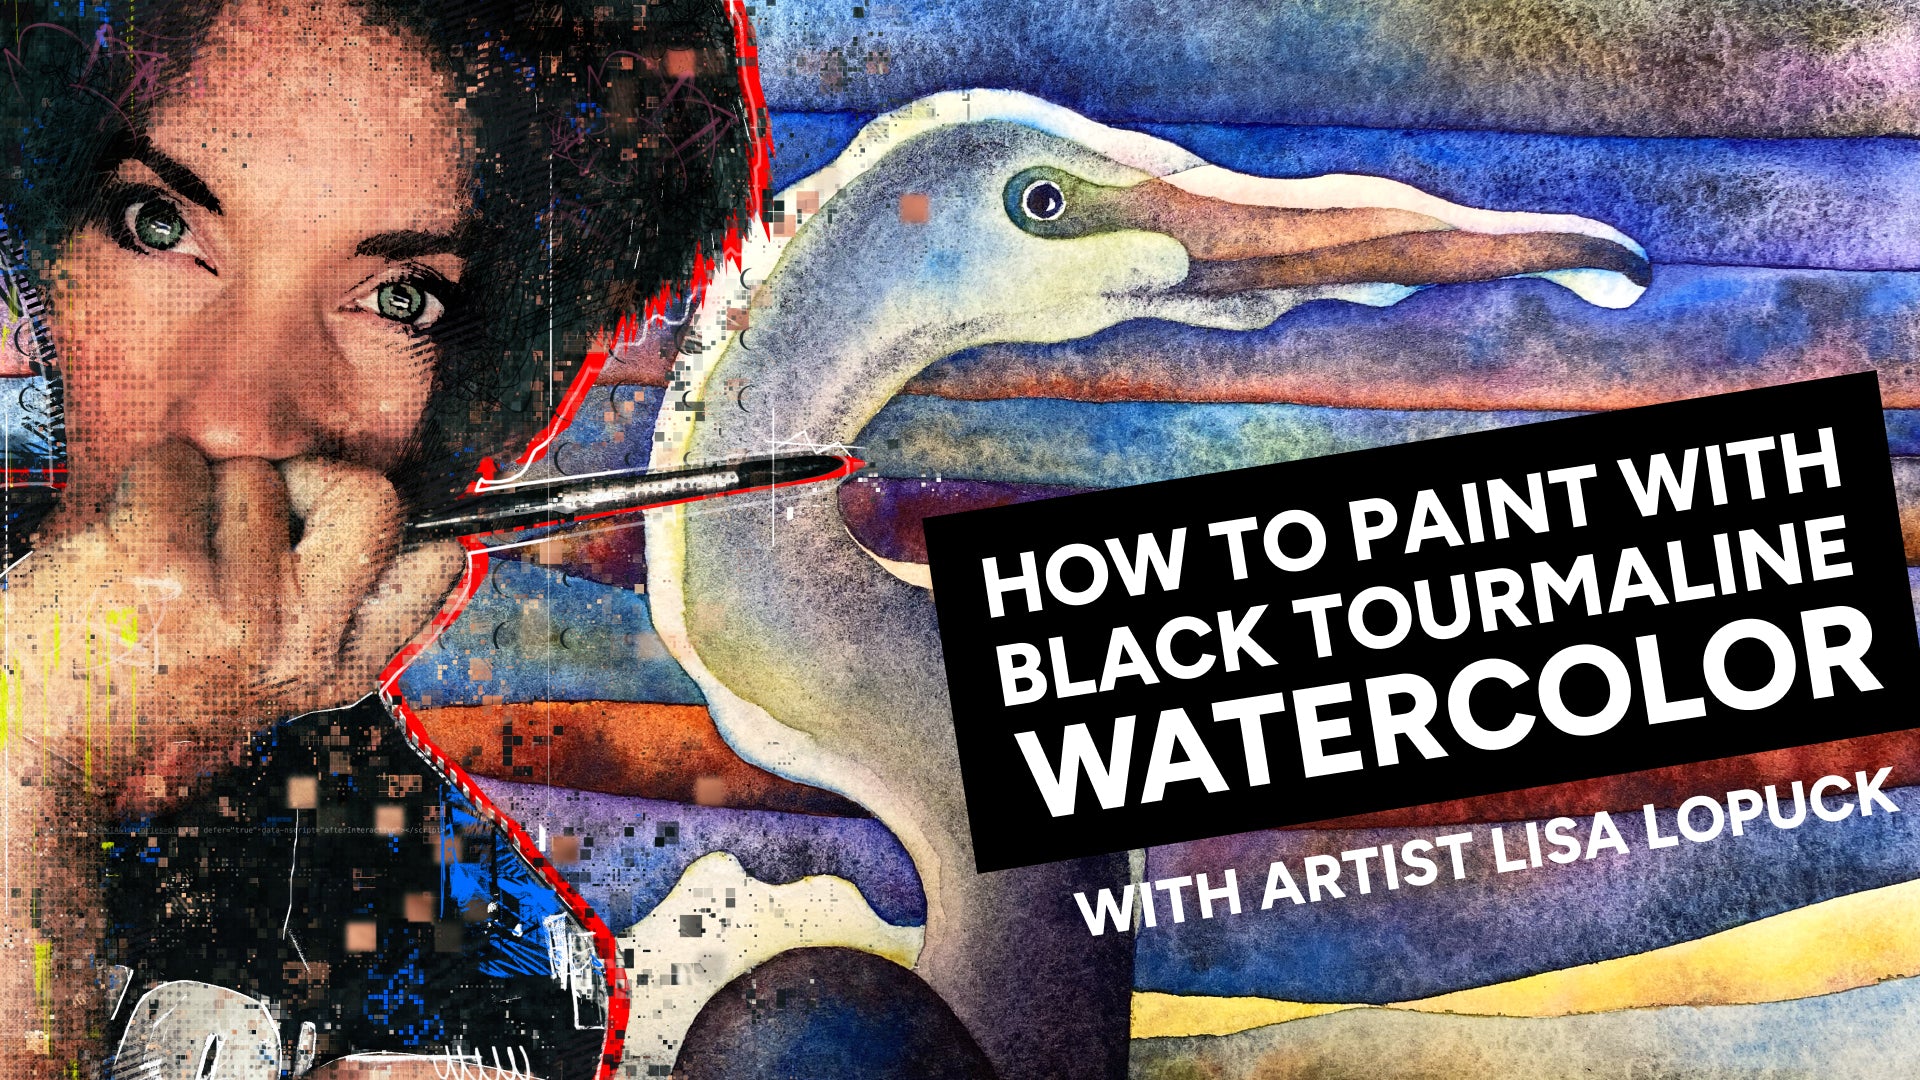 Load video: How to paint with black tourmaline watercolor